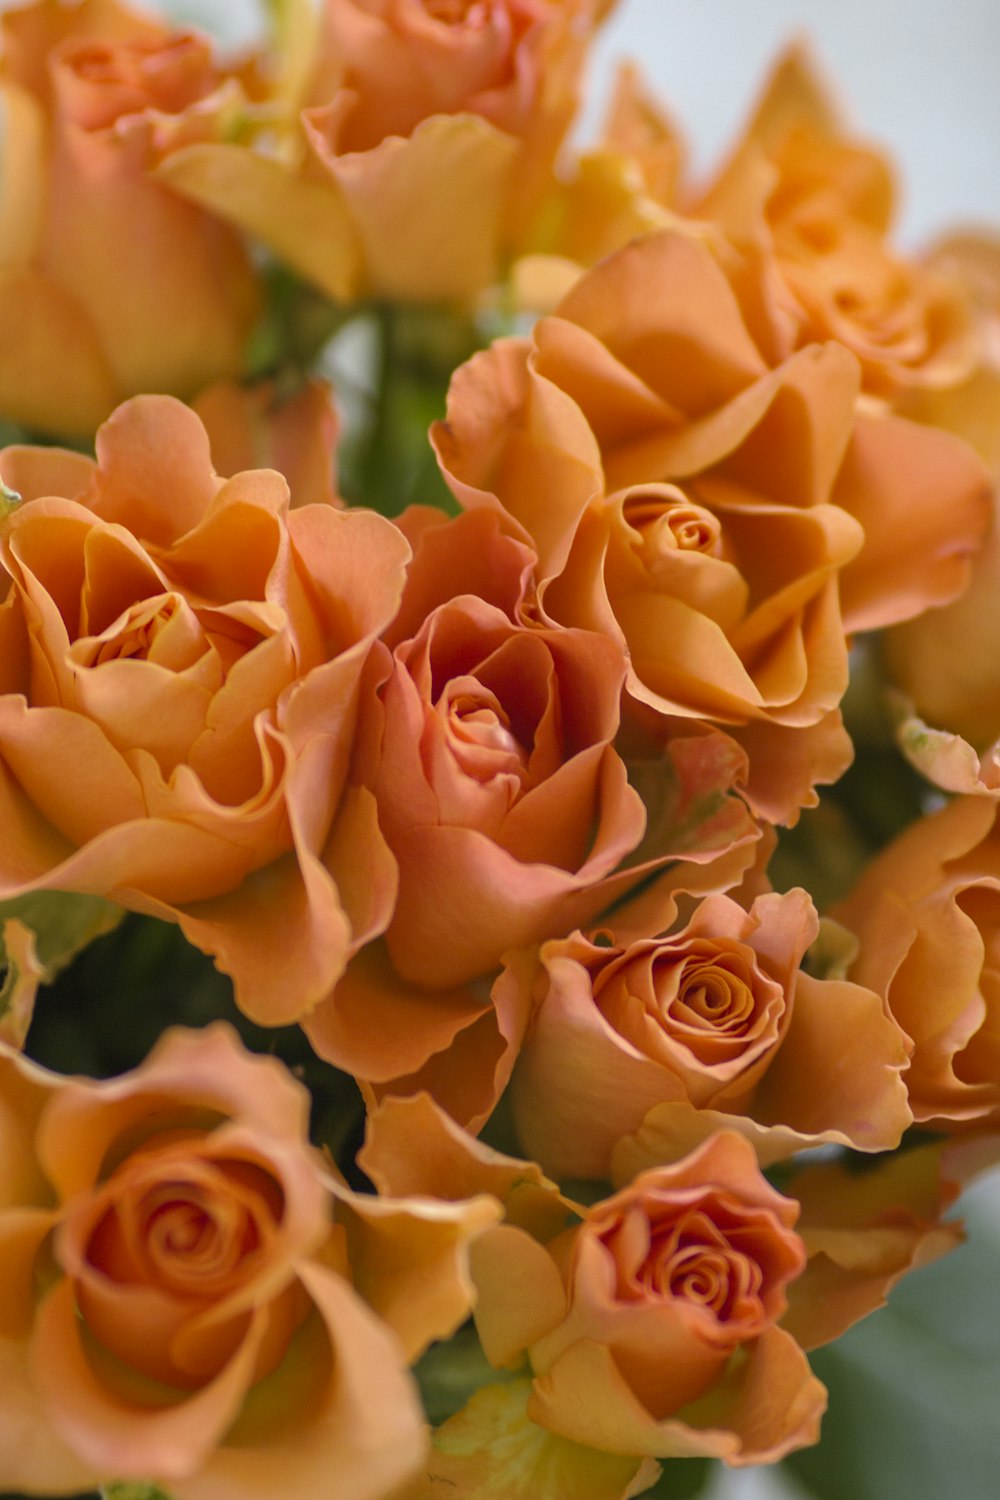 orange roses in close up photography